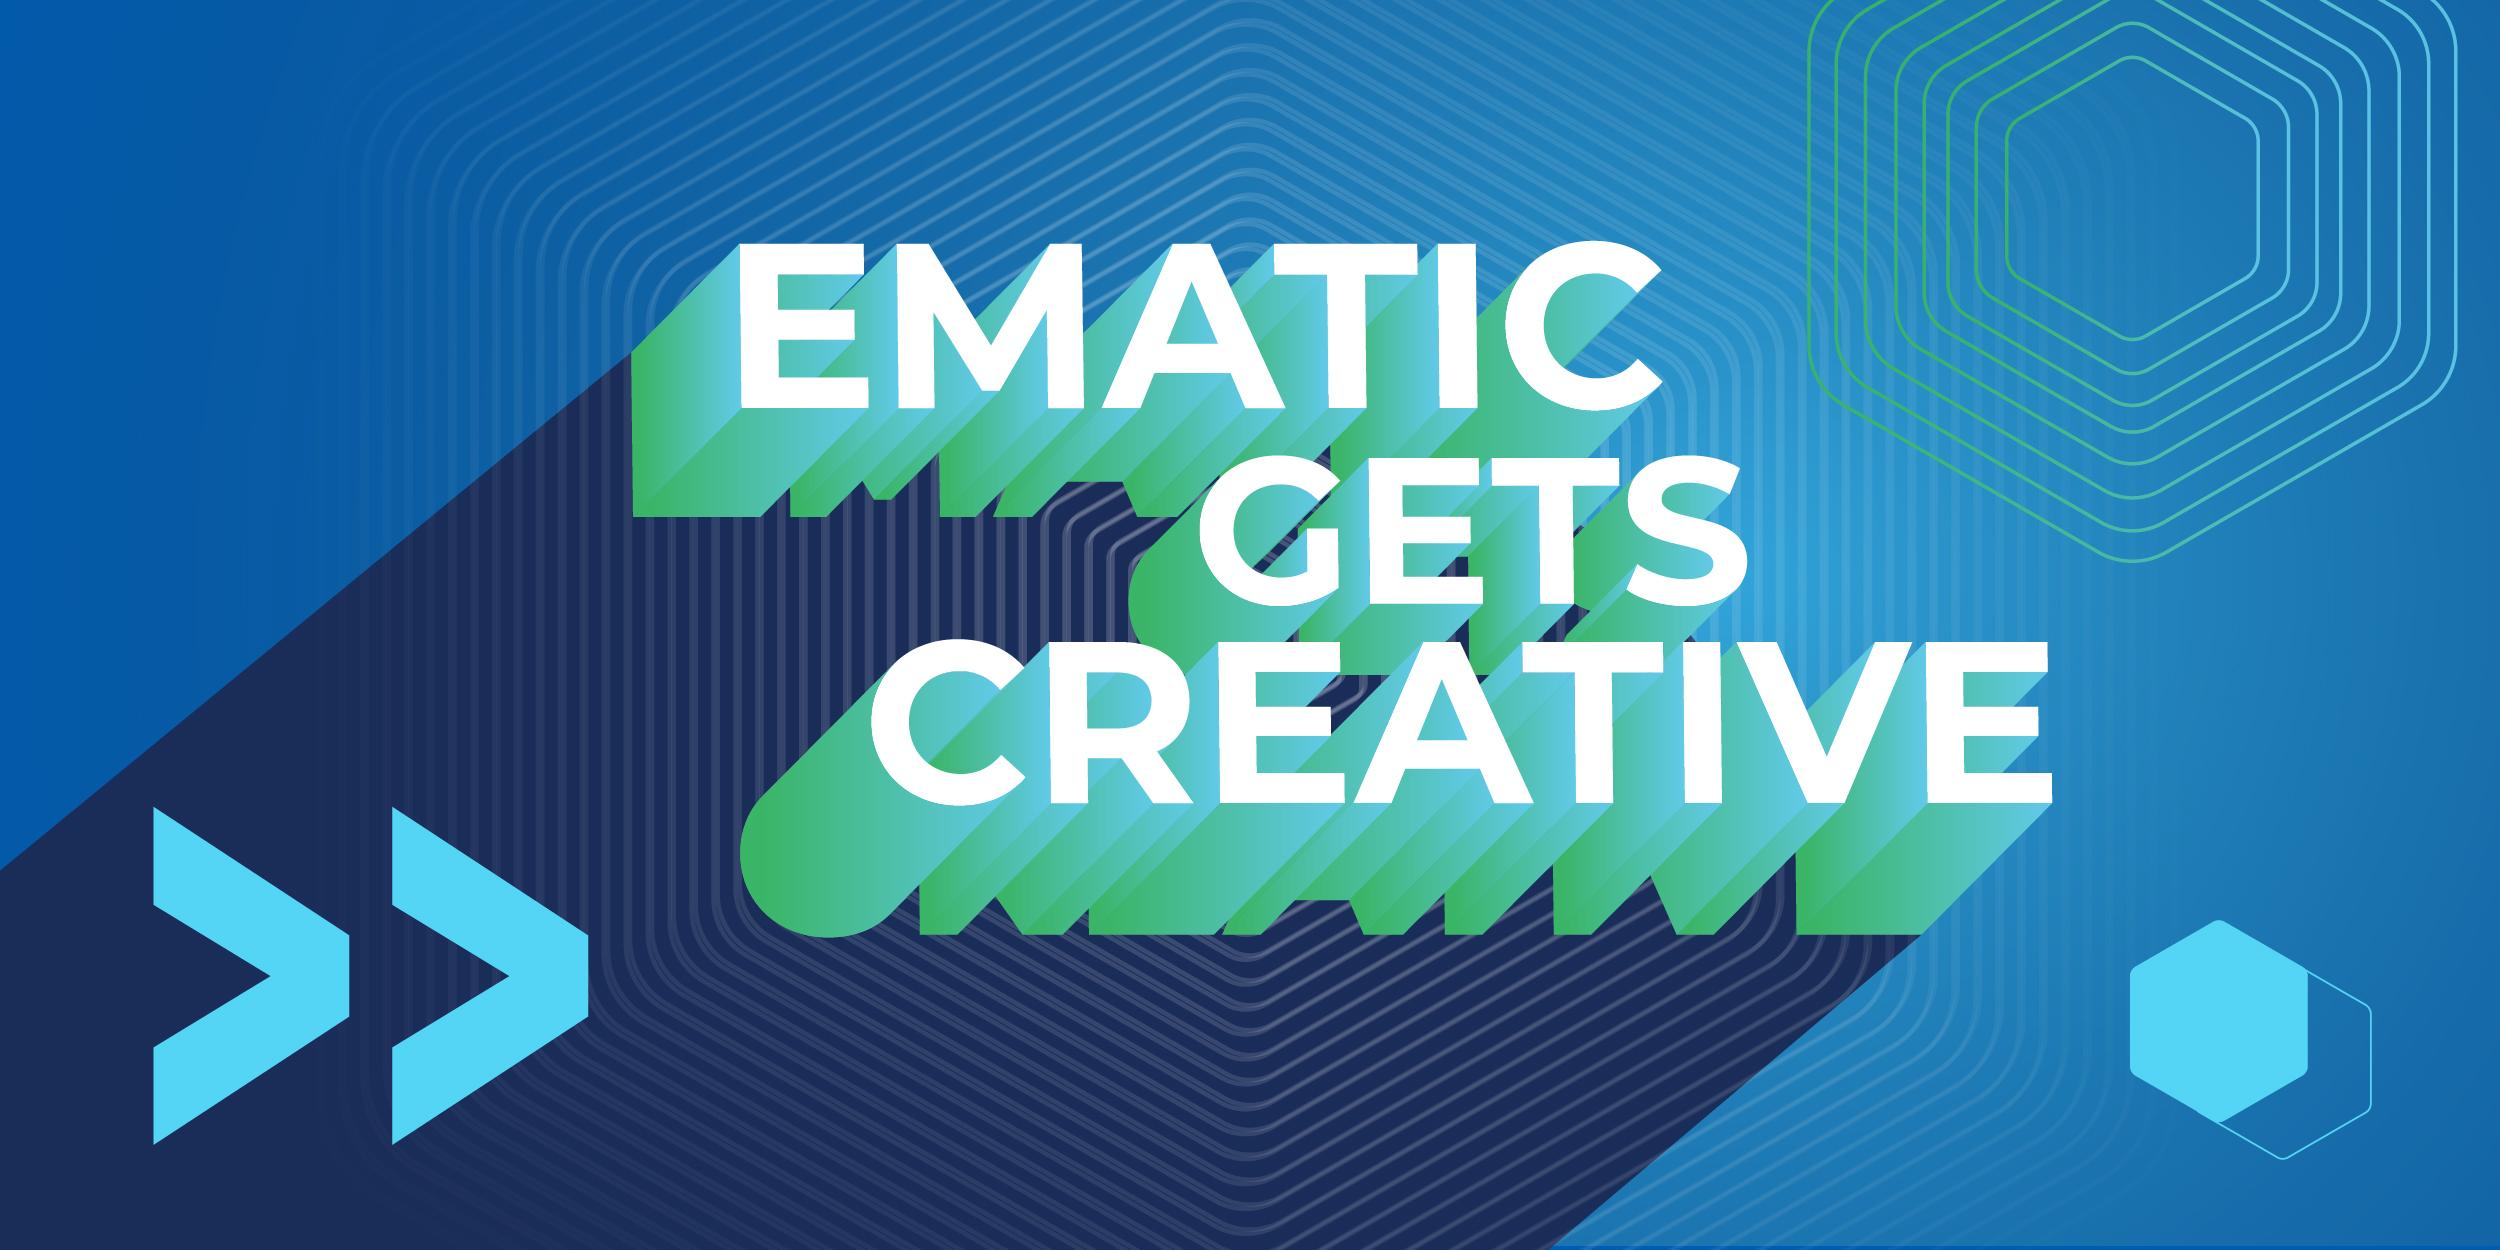 Ematic Gets Creative